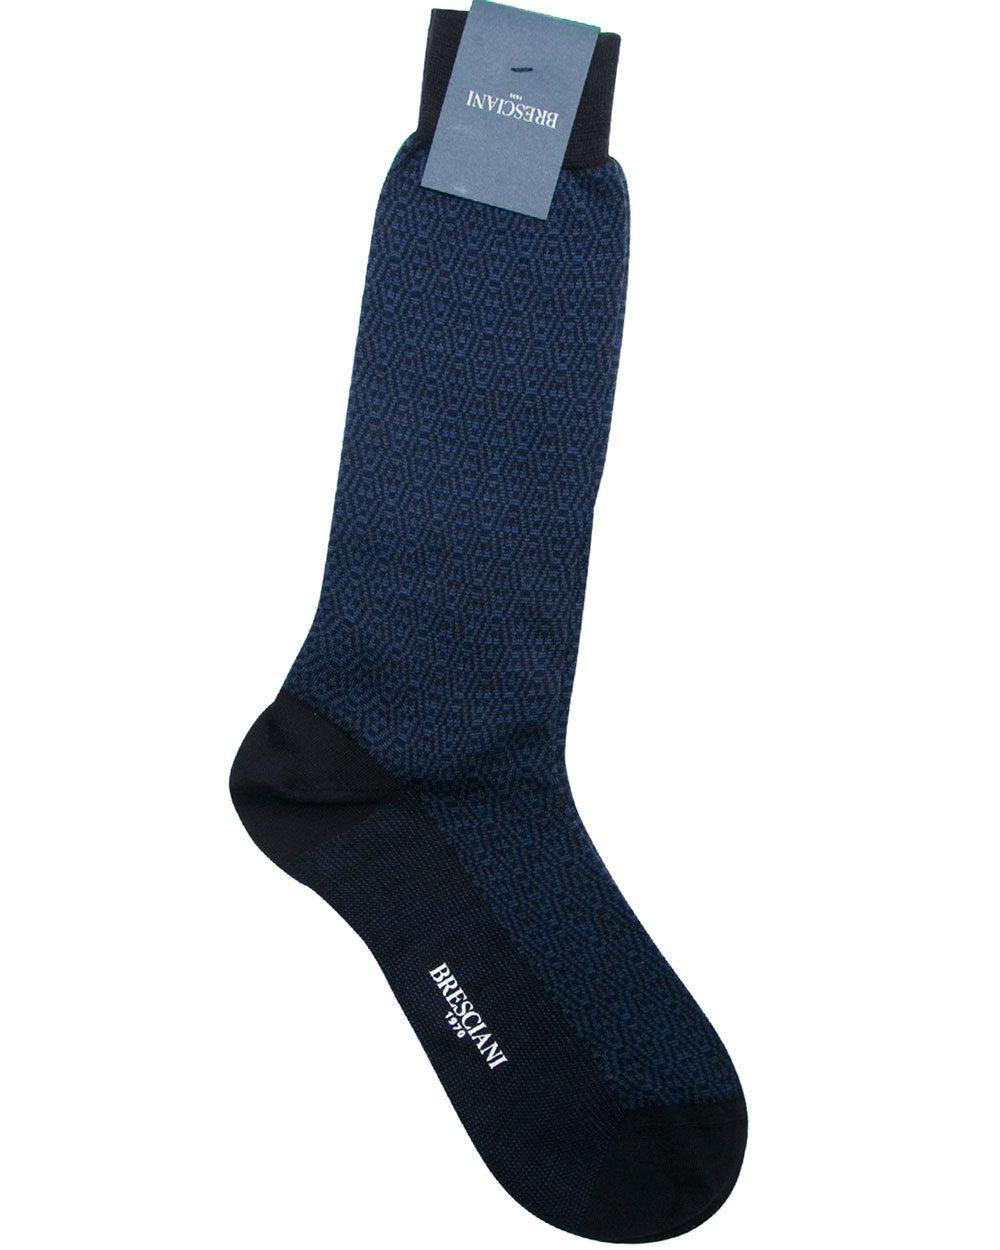 Navy and Blue Nuclear Midcalf Socks